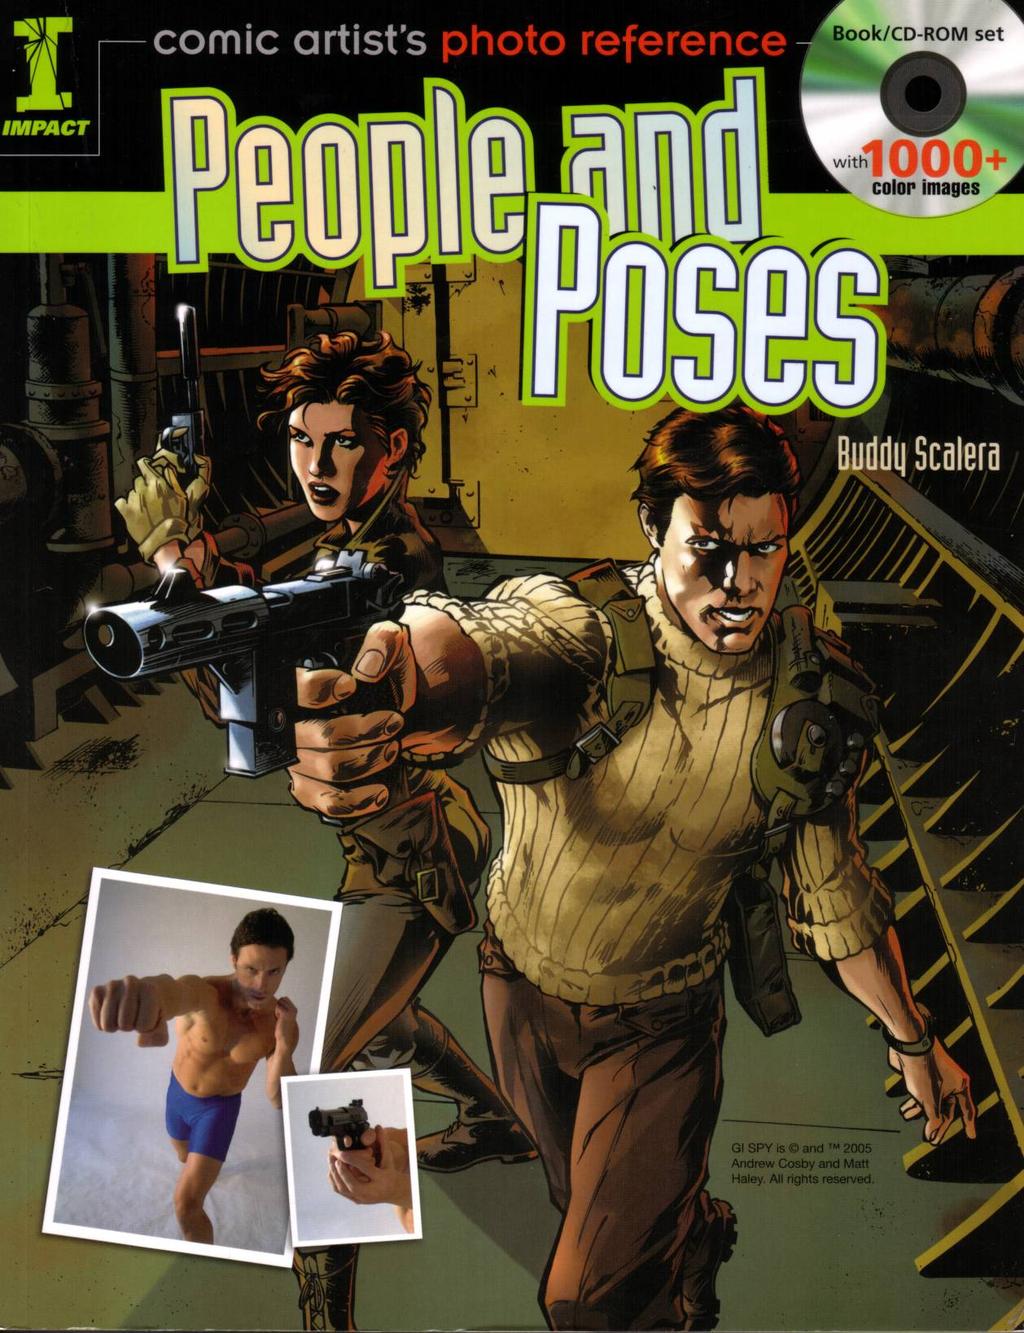 Get a copy of this book, or something like it: People and Poses by Buddy Scalera This title has a few hundred high-quality photos of both male and female models in various typical comic book poses